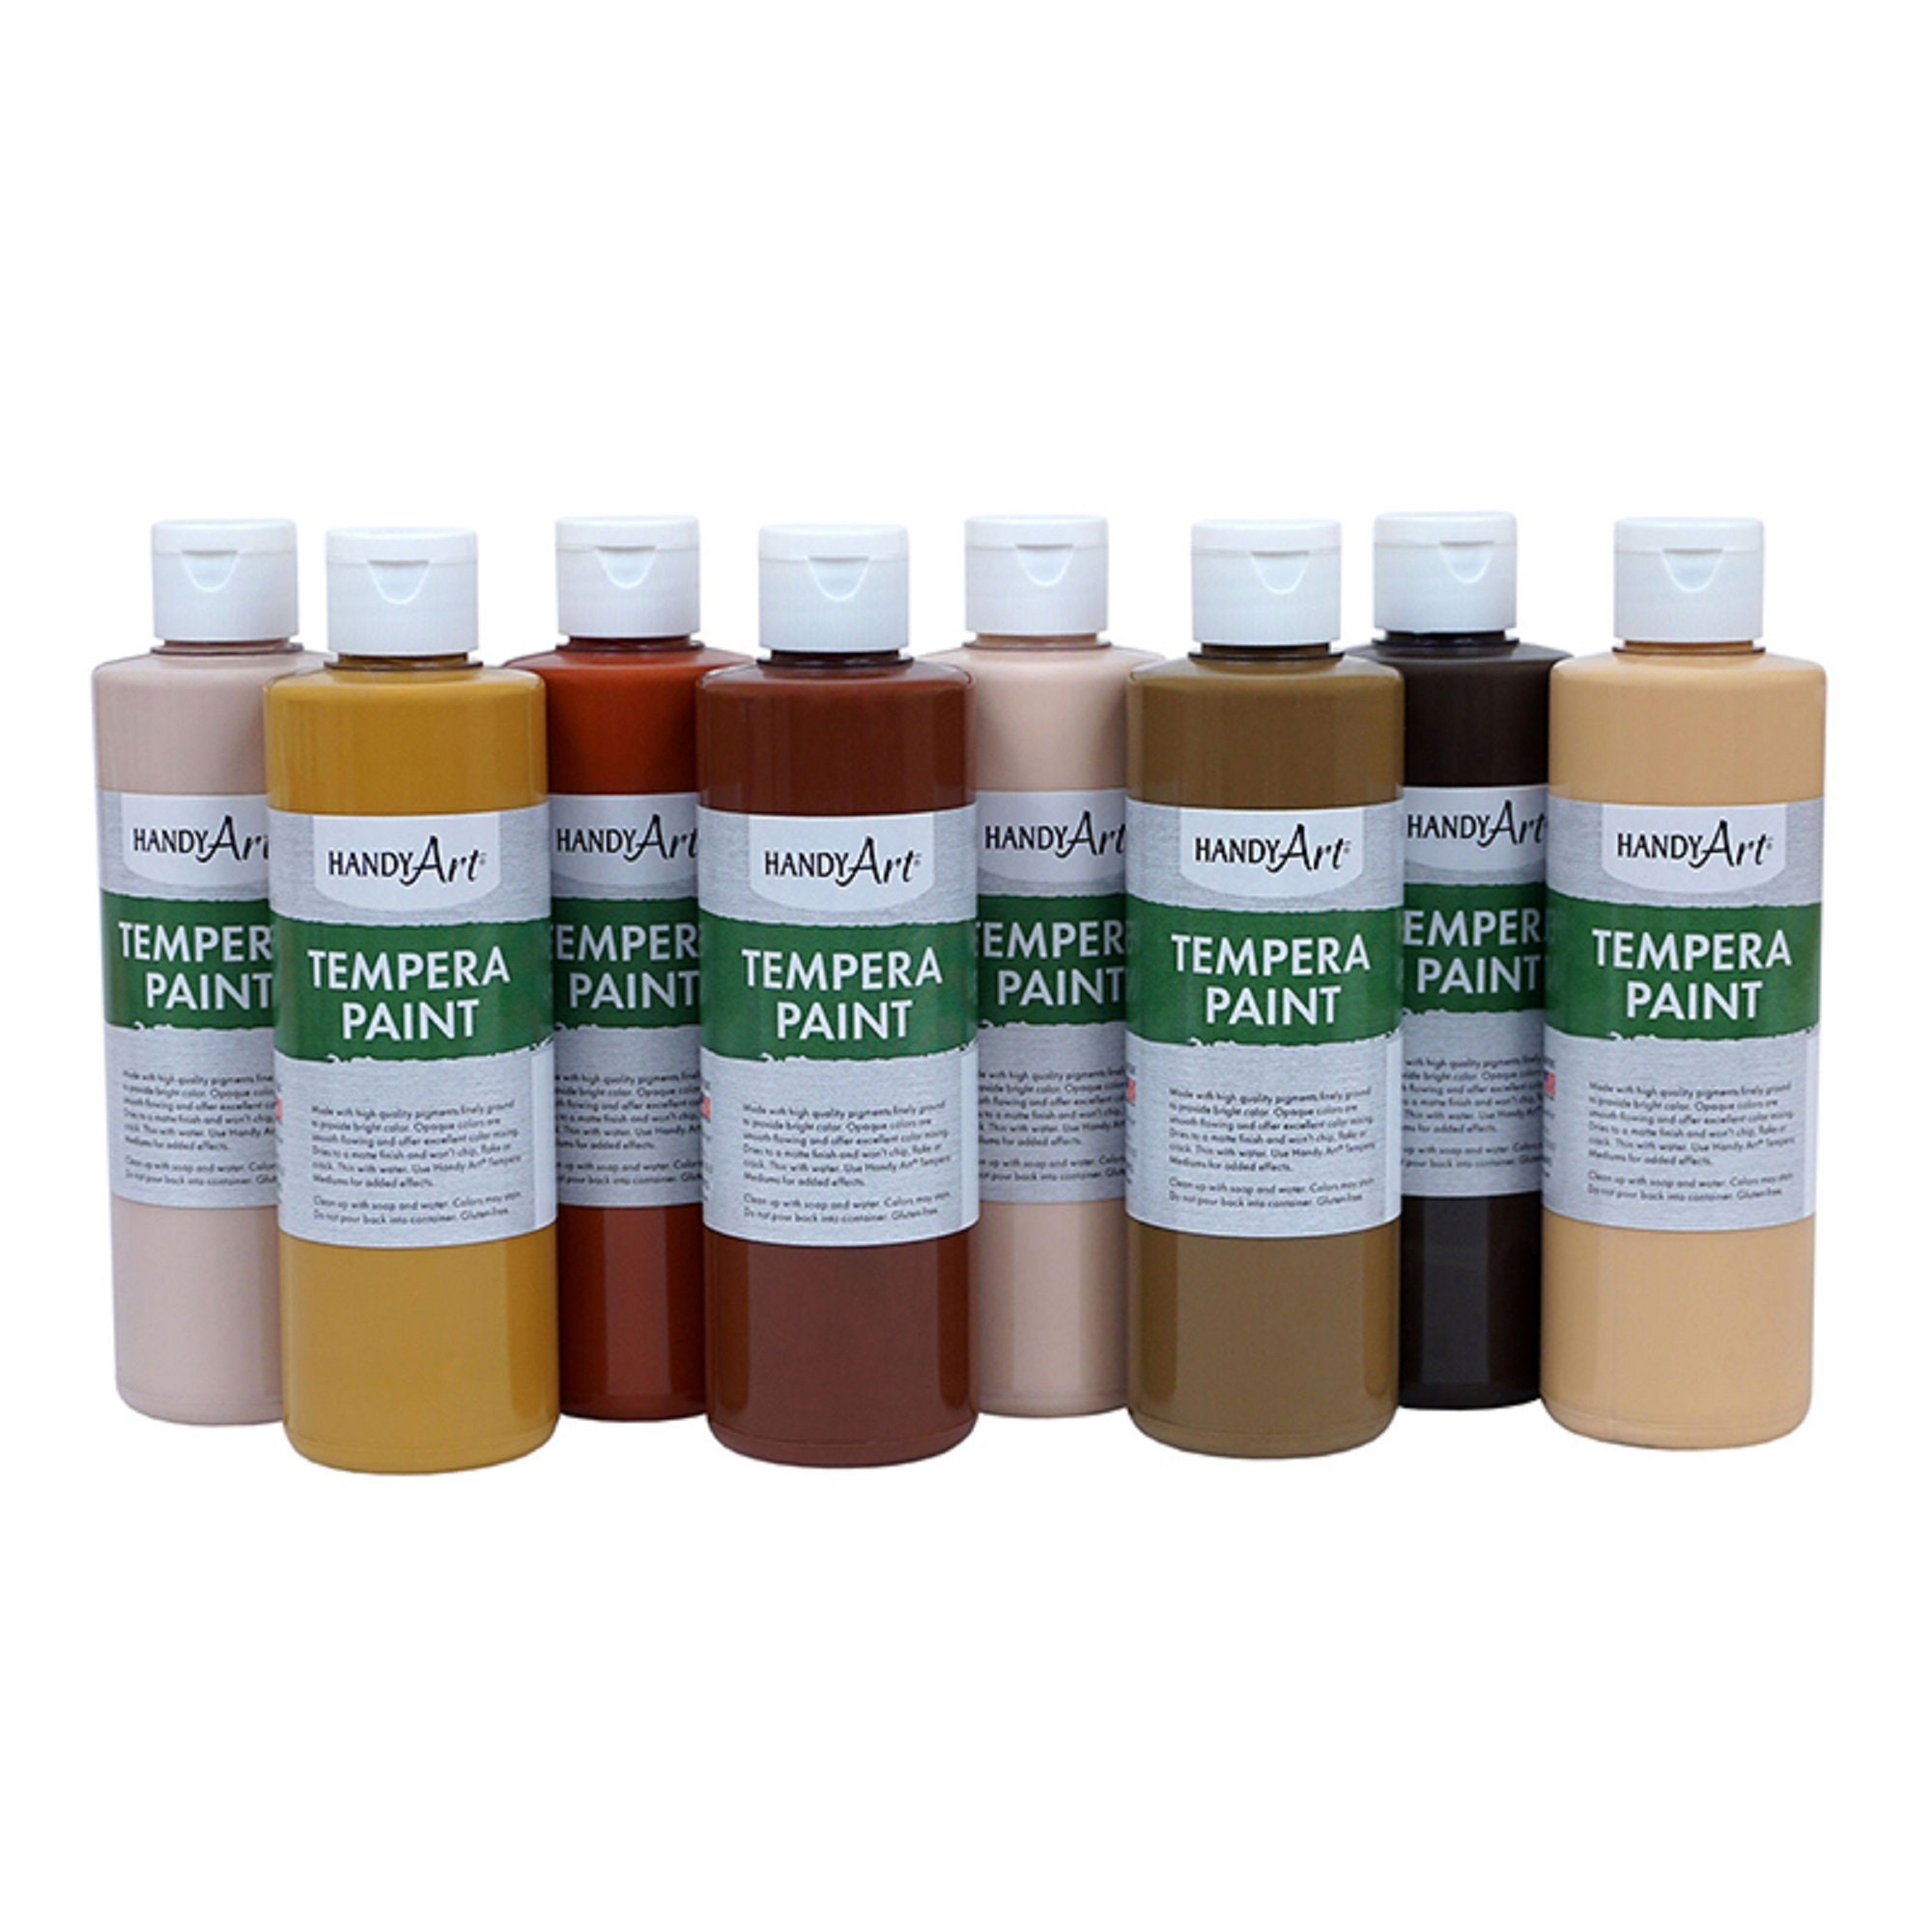 Milo Tempera Paint Set of 8 Colors | 16 oz Bottles | Made in The USA